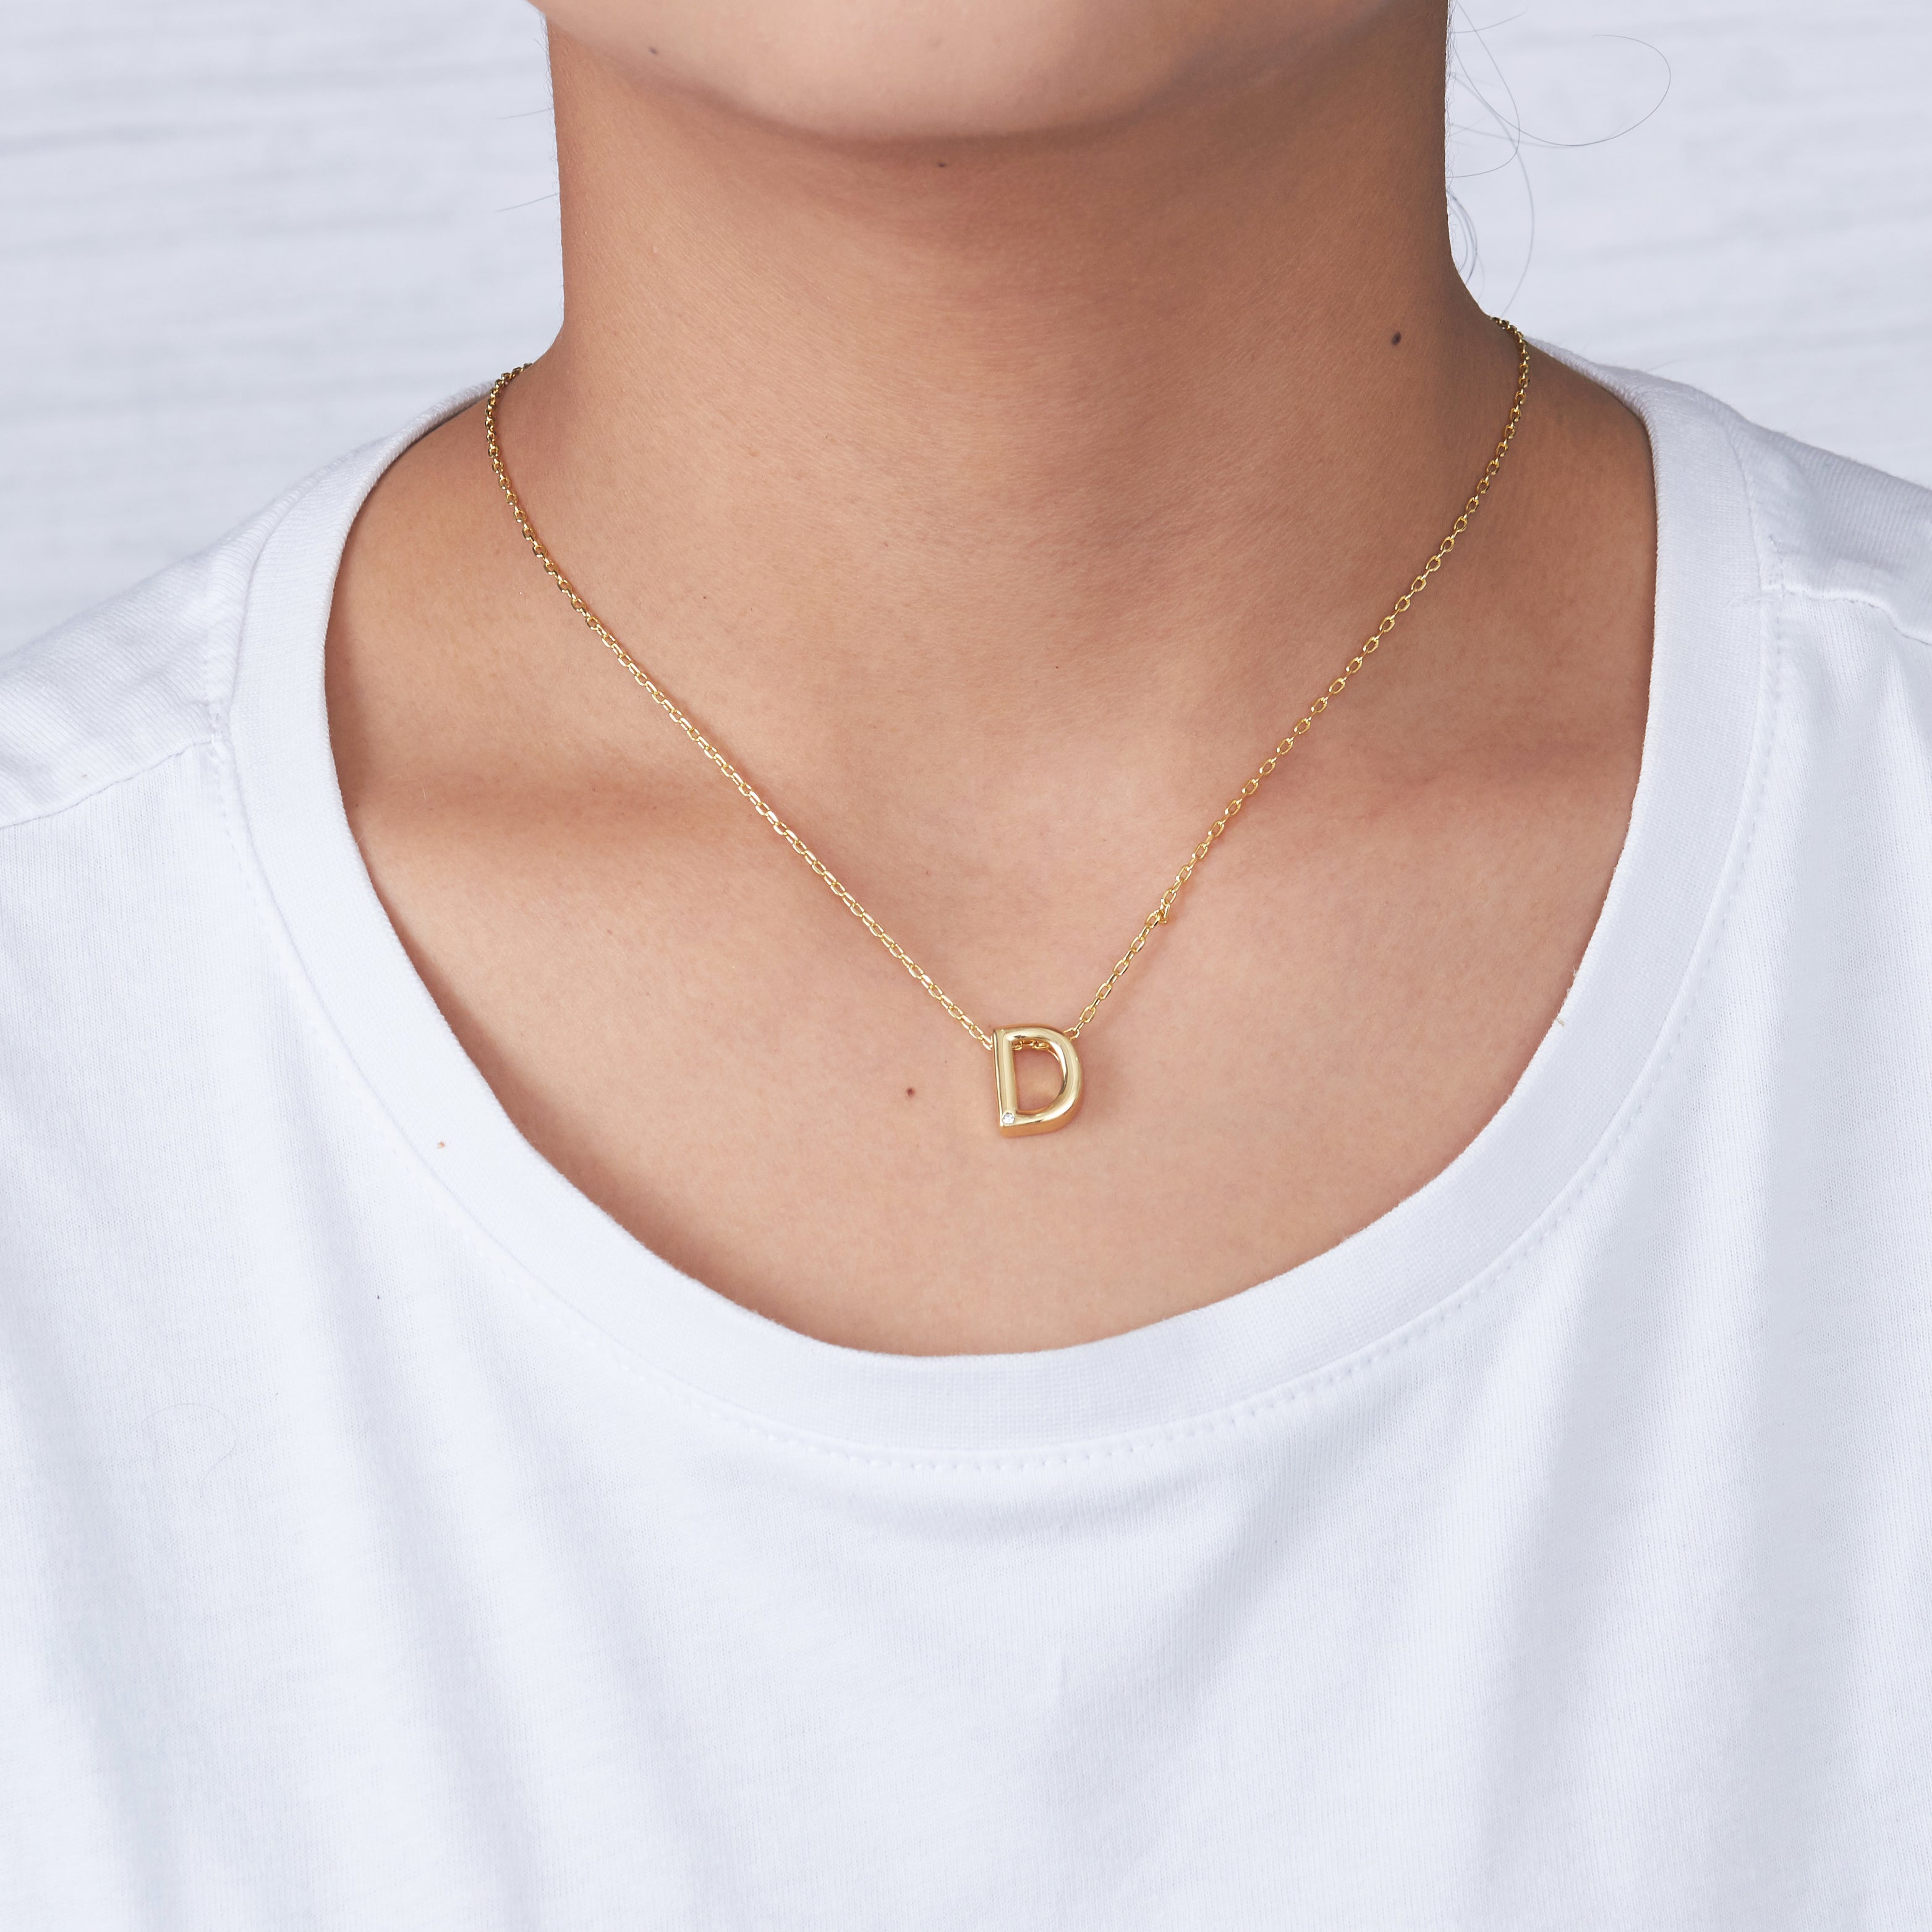 Gold Plated Initial Necklace Letter D Created with Zircondia® Crystals